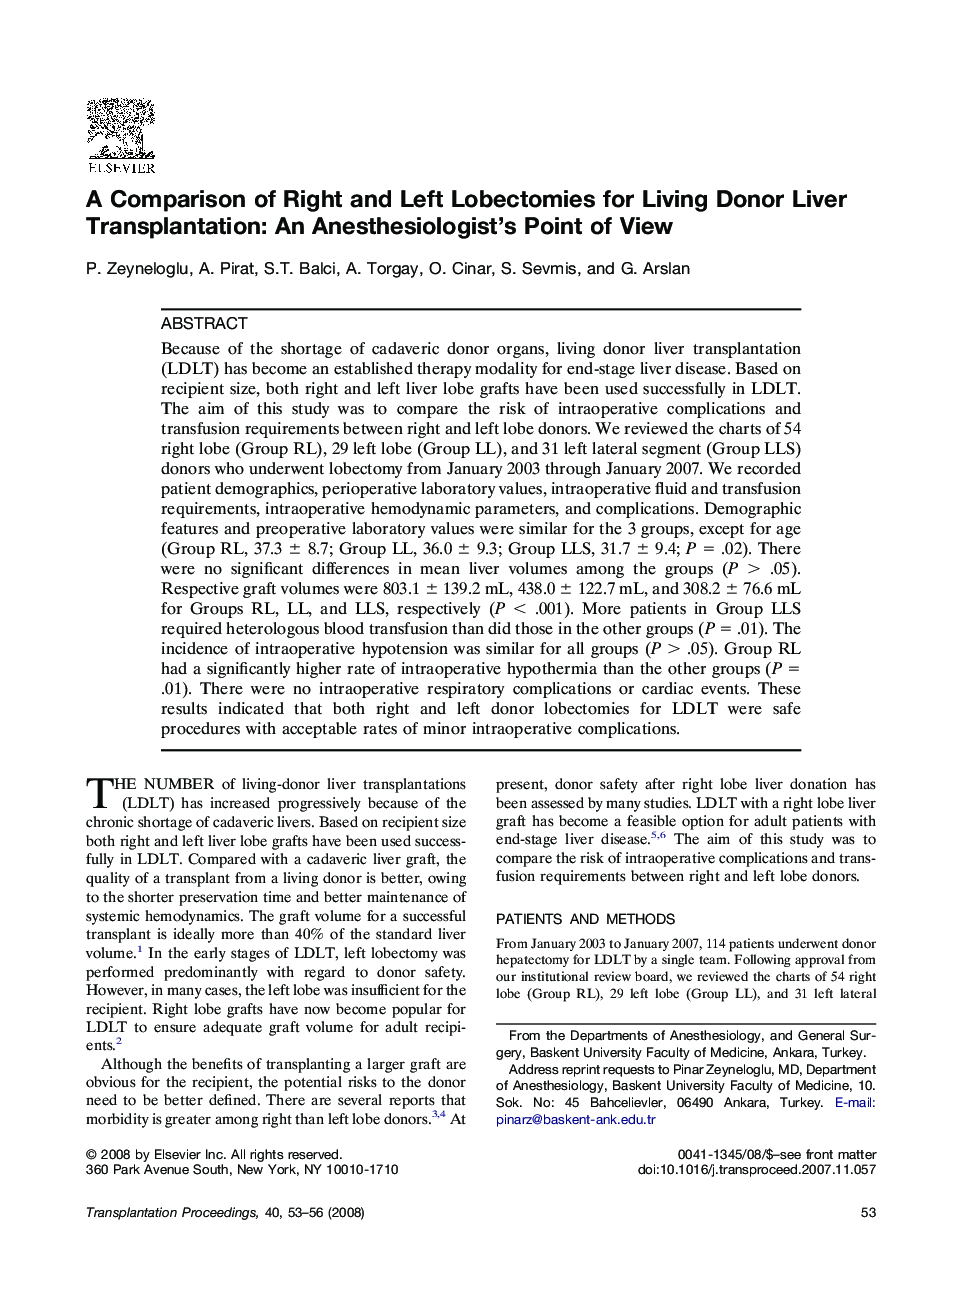 A Comparison of Right and Left Lobectomies for Living Donor Liver Transplantation: An Anesthesiologist's Point of View